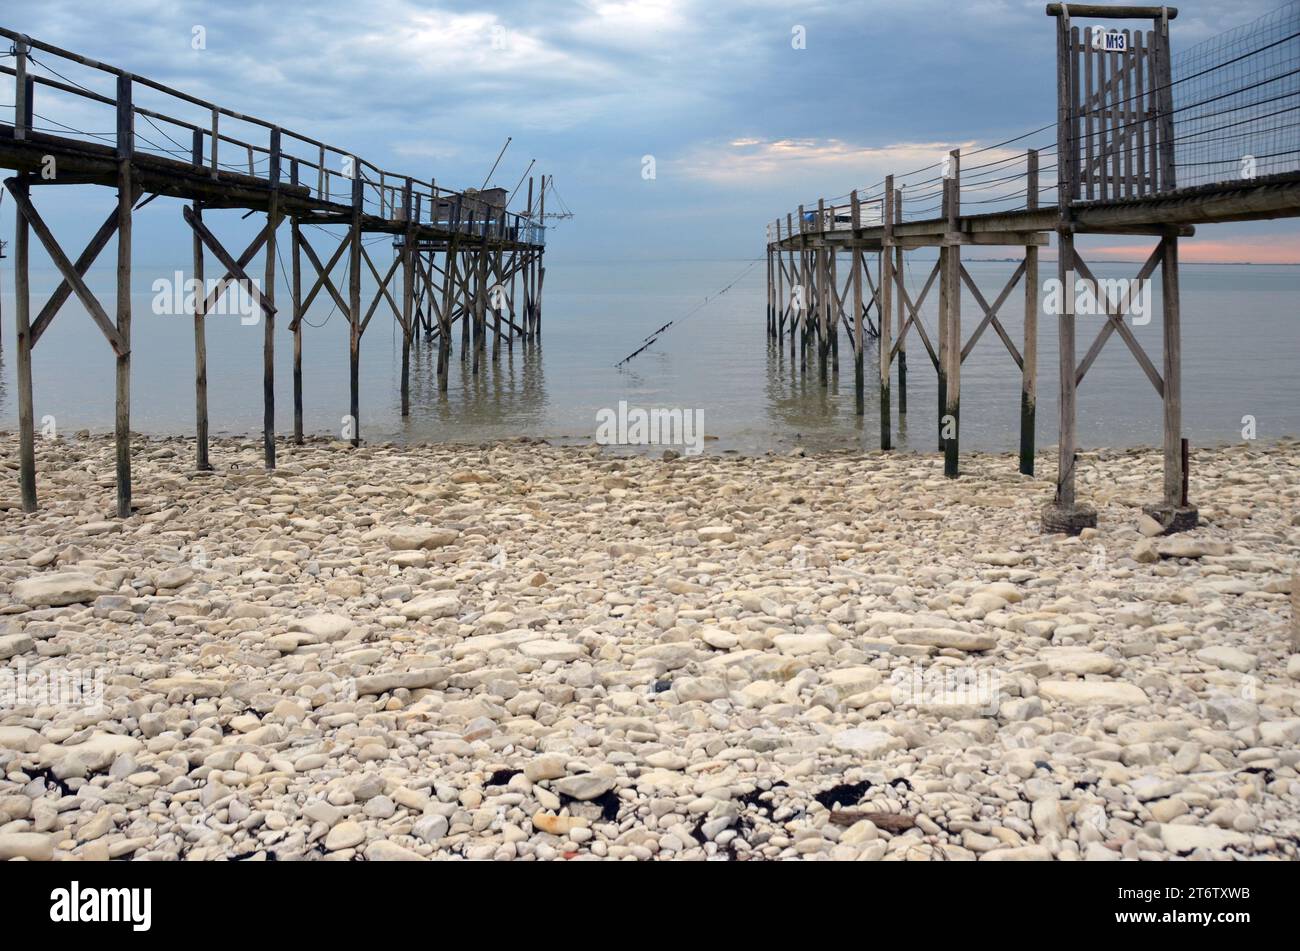 Along the atlantic coastline of the Vendée region in France are numerous fishing structures on stilt, they're called pêche au carrelet. Stock Photo